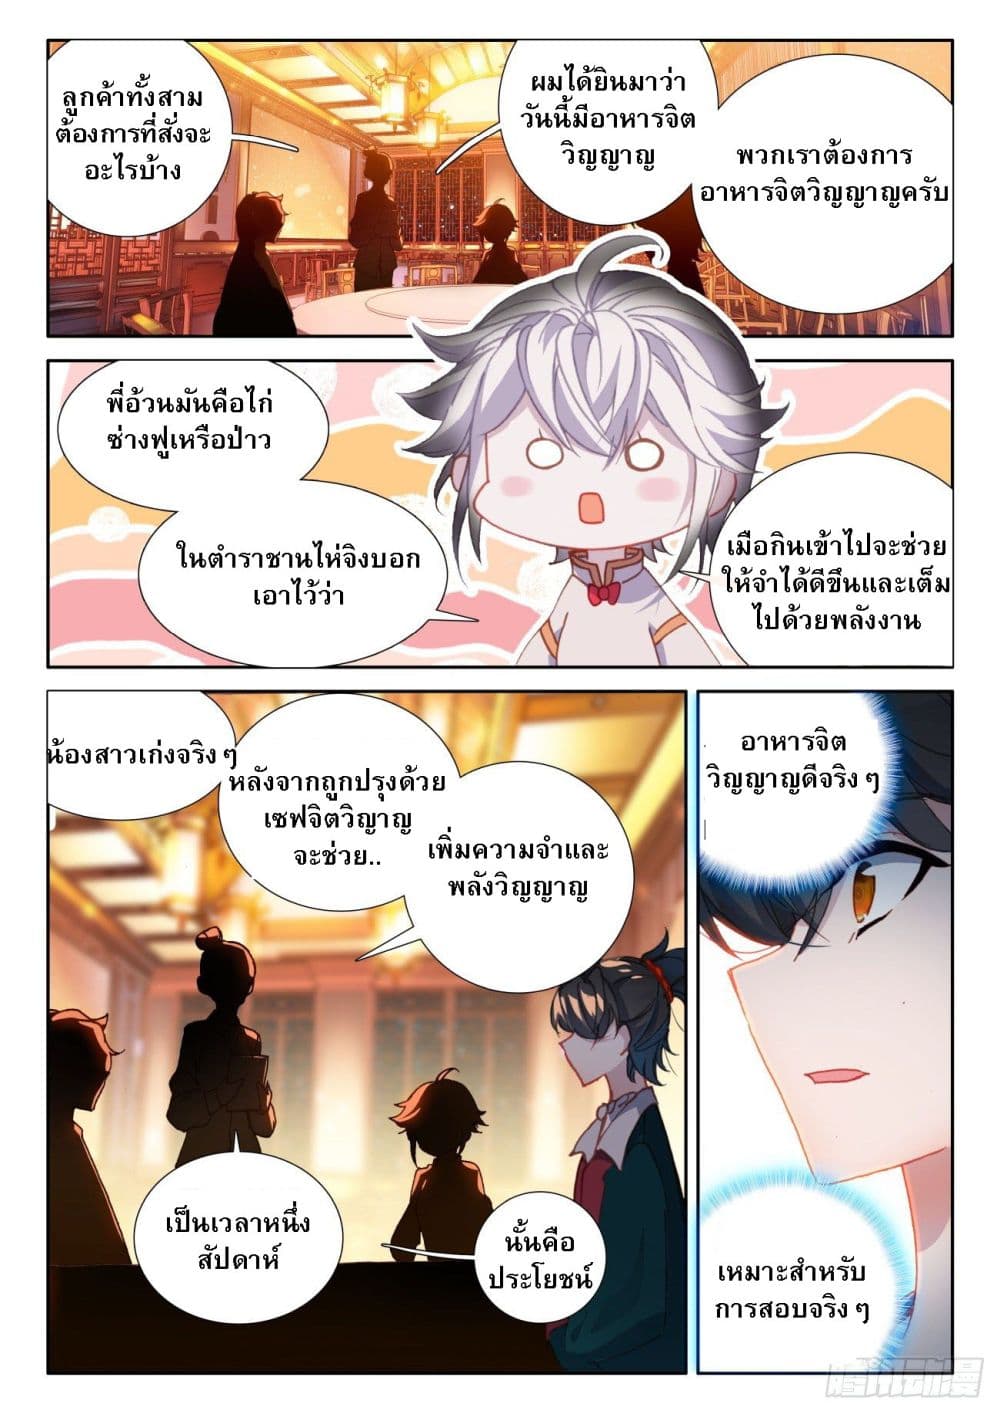 Becoming Immortal by Paying Cash ตอนที่ 8 (15)